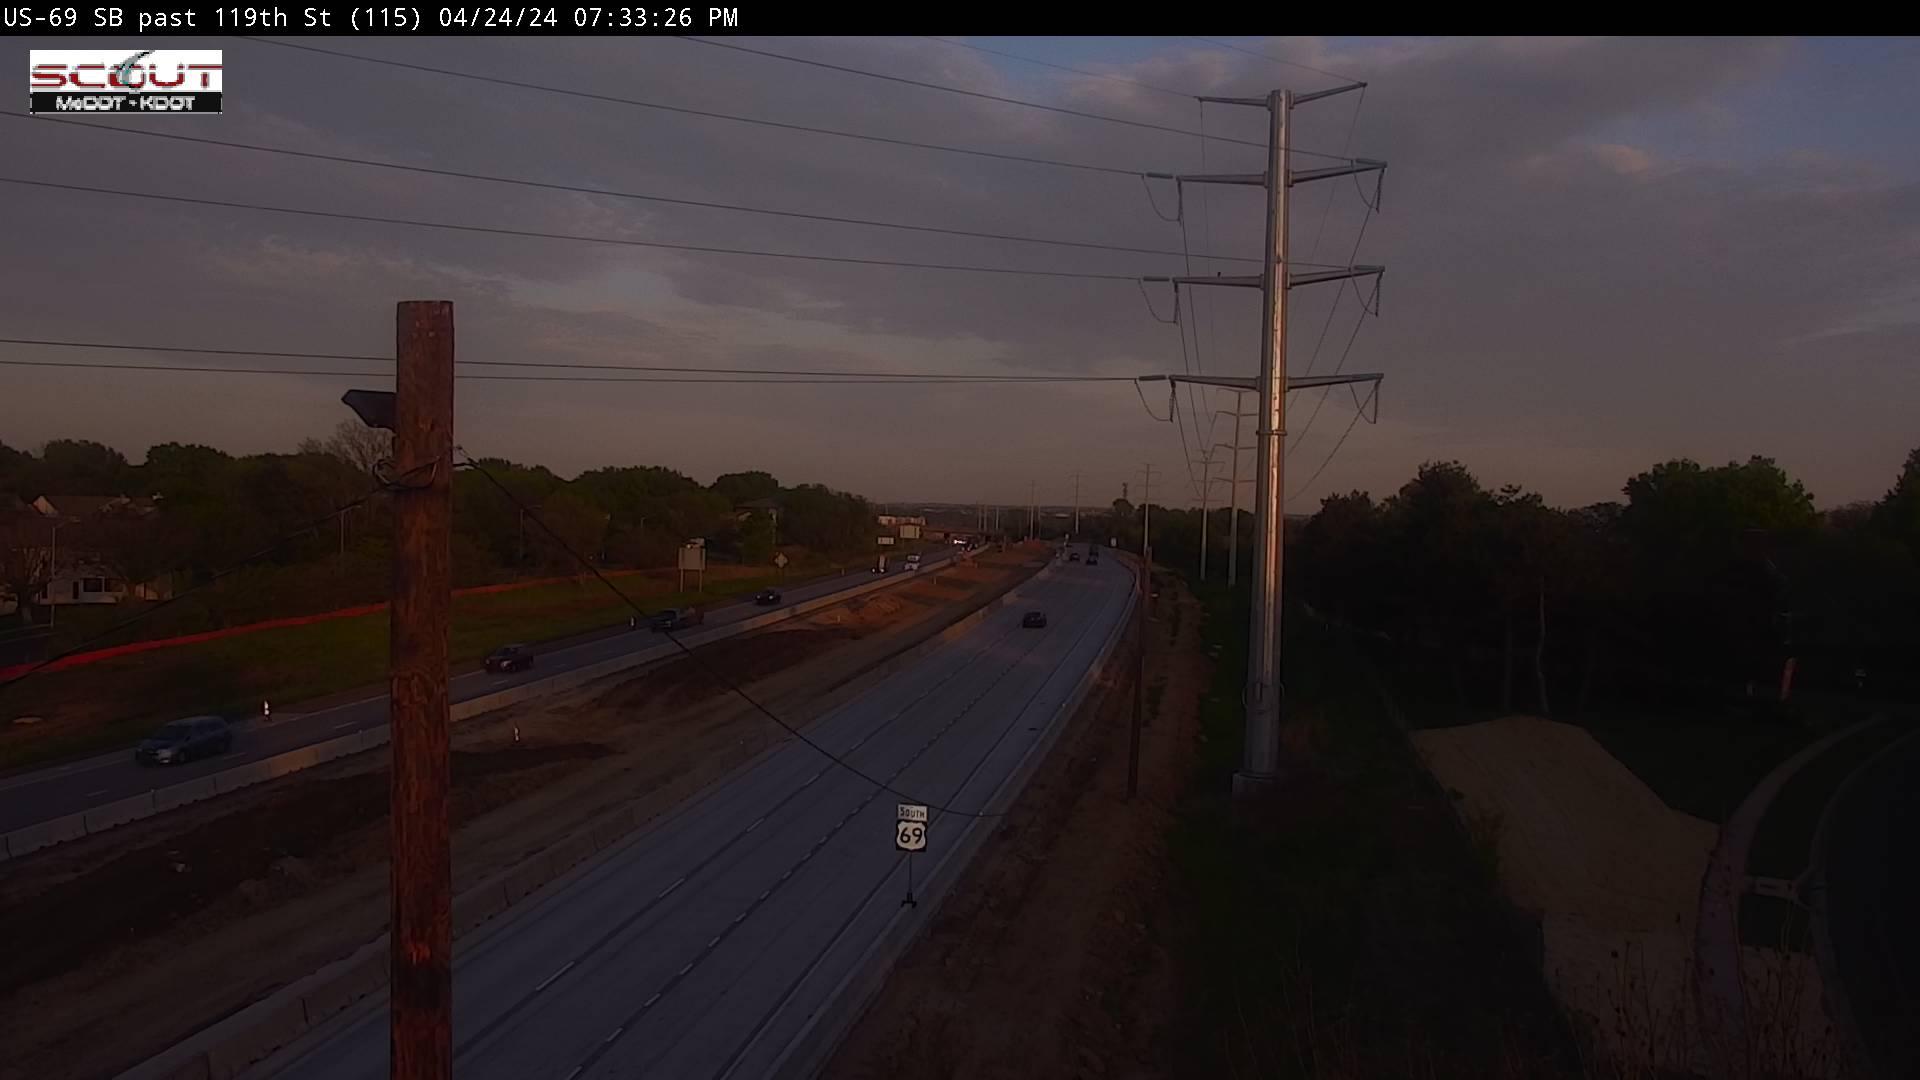 Traffic Cam Overland Park: US-69 S @ SOUTH OF 119TH ST Player